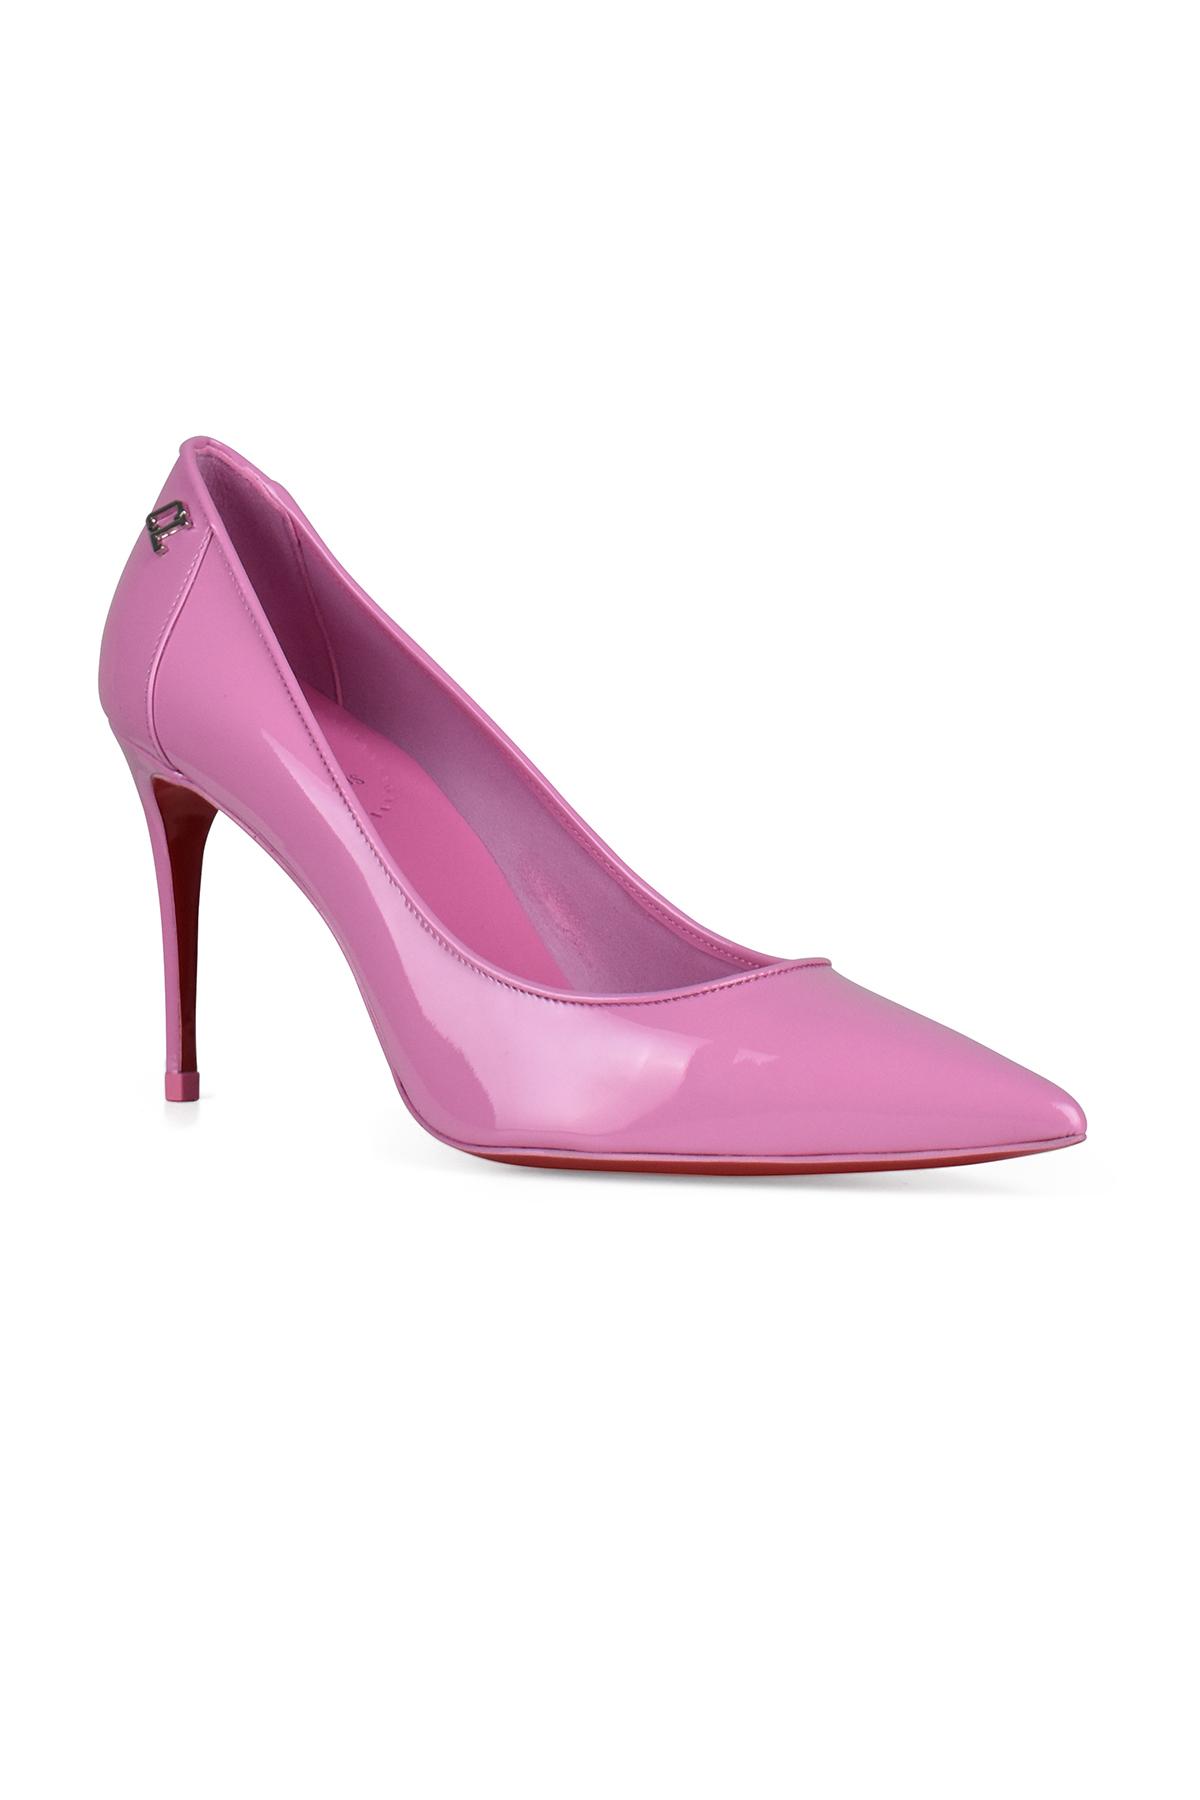 Christian Louboutin Sporty Kate 85 Pumps in Pink | Lyst